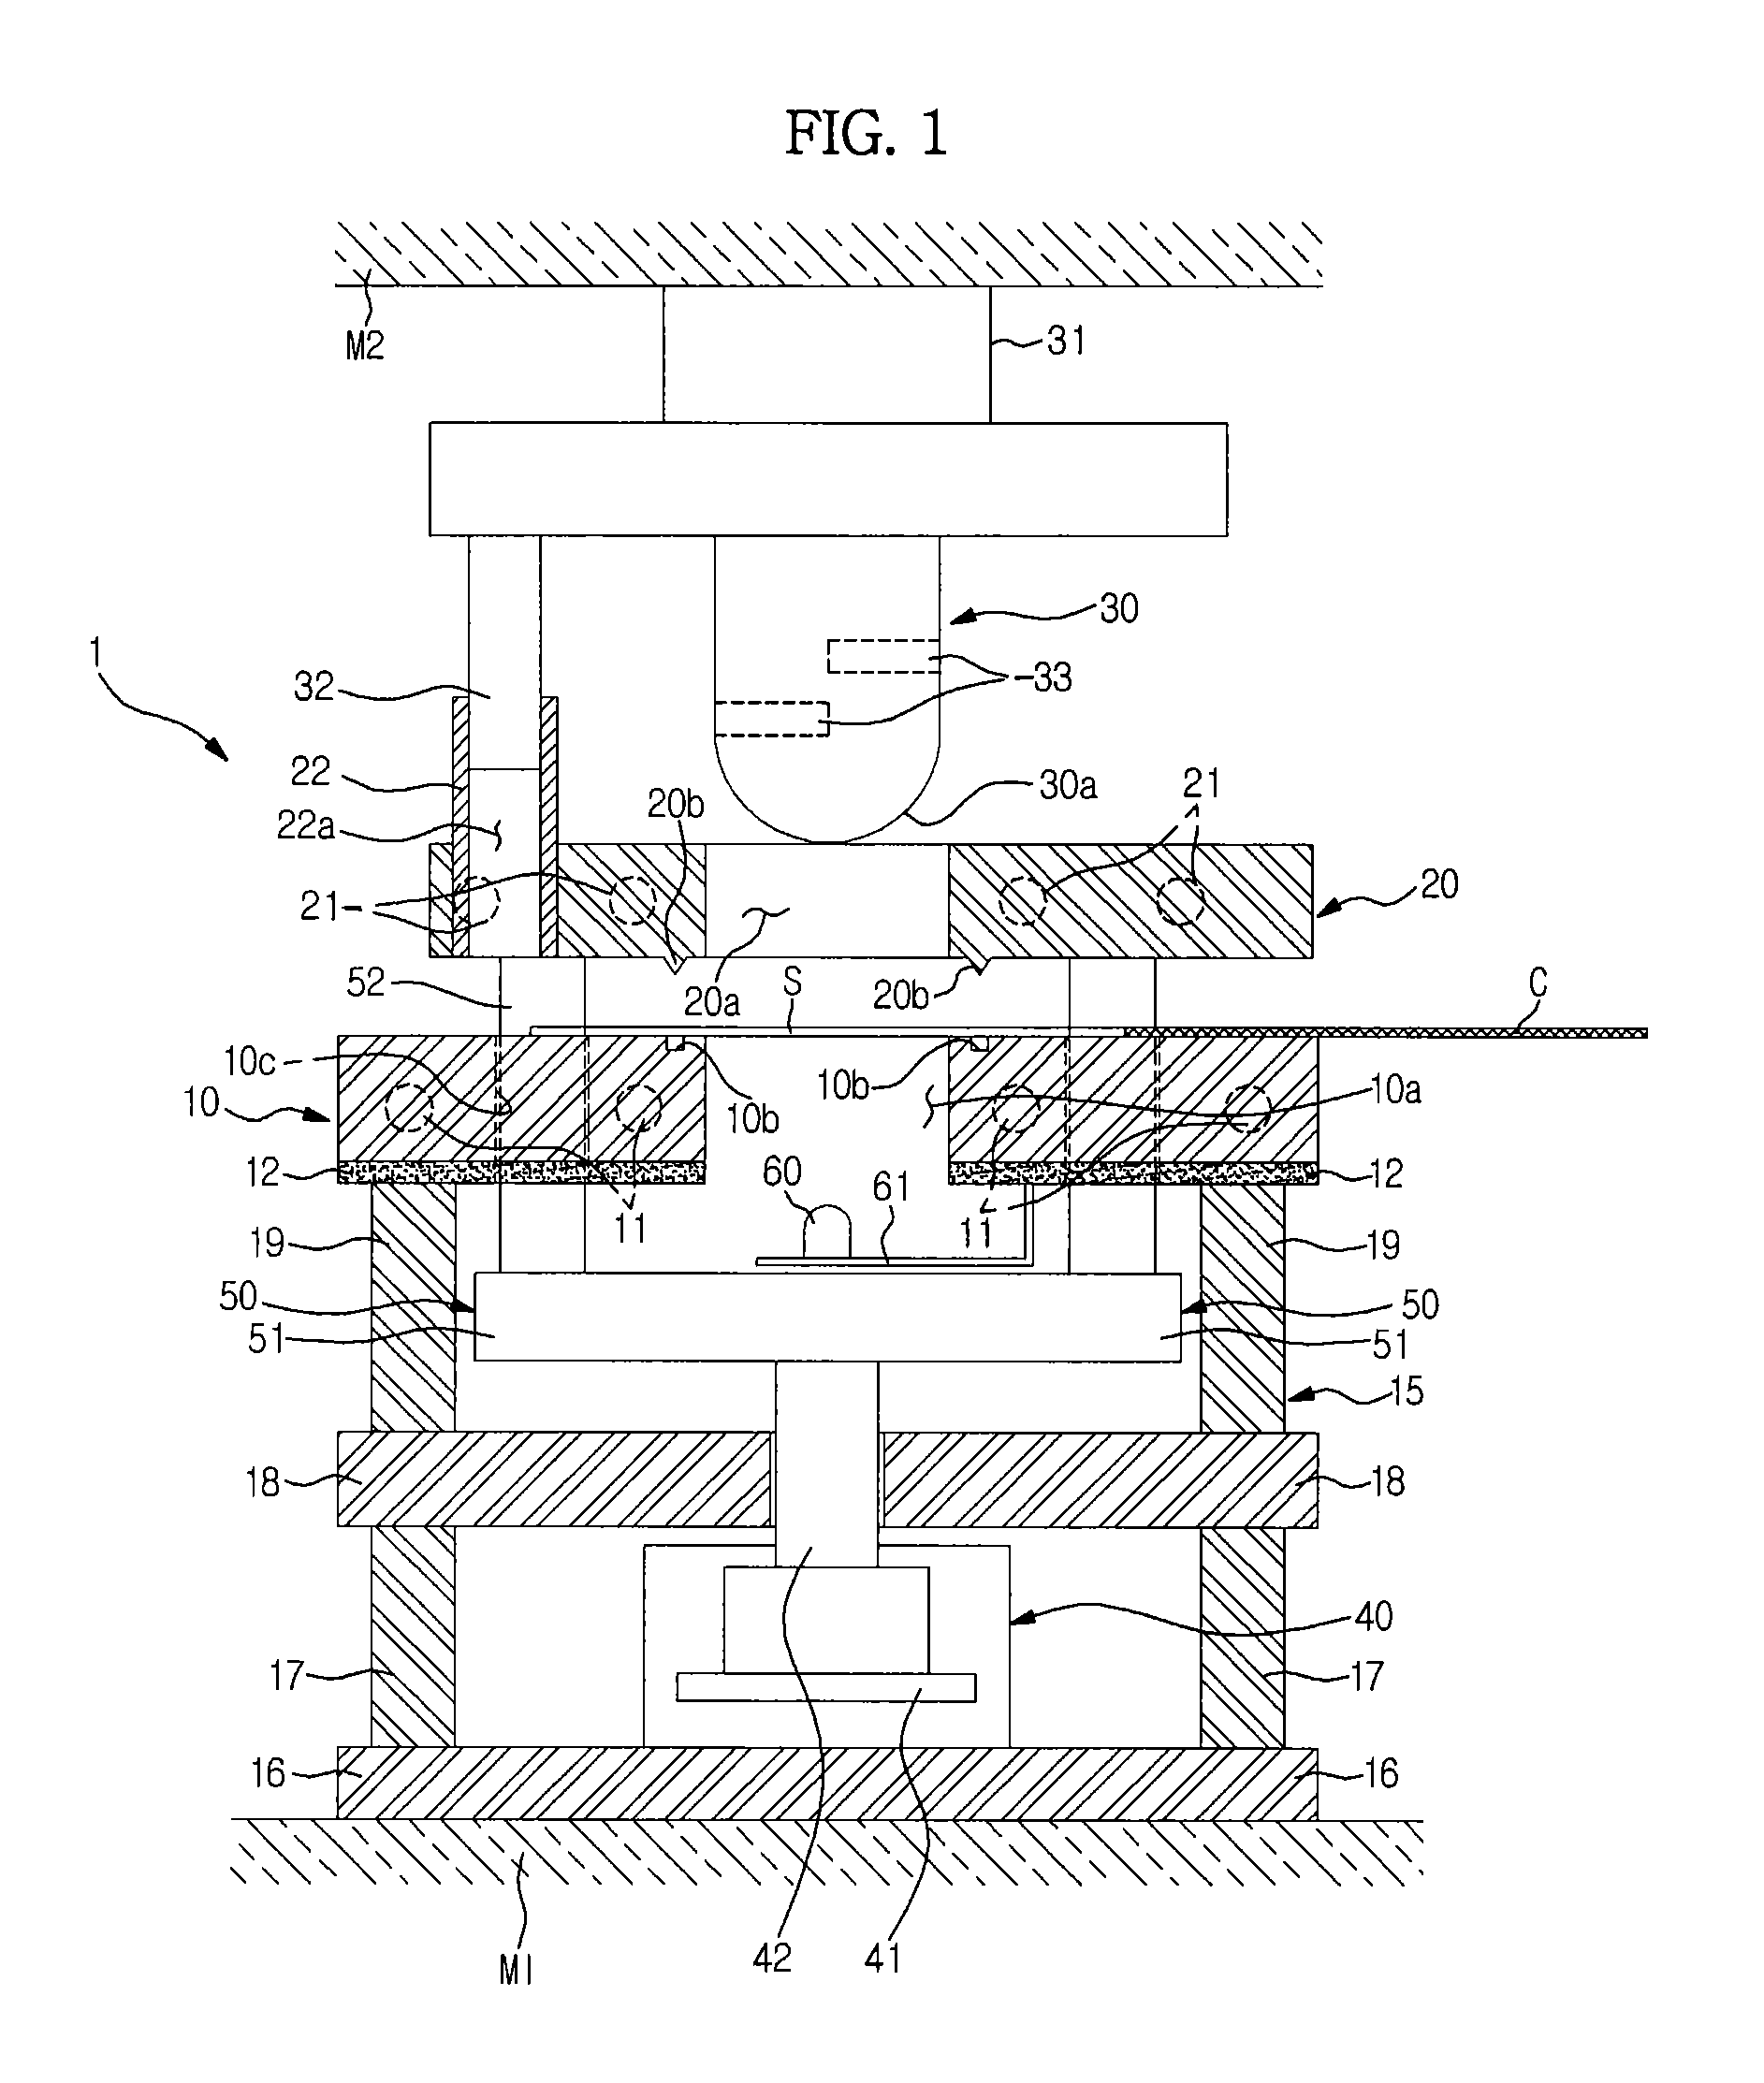 Tester apparatus for obtaining forming limit diagram